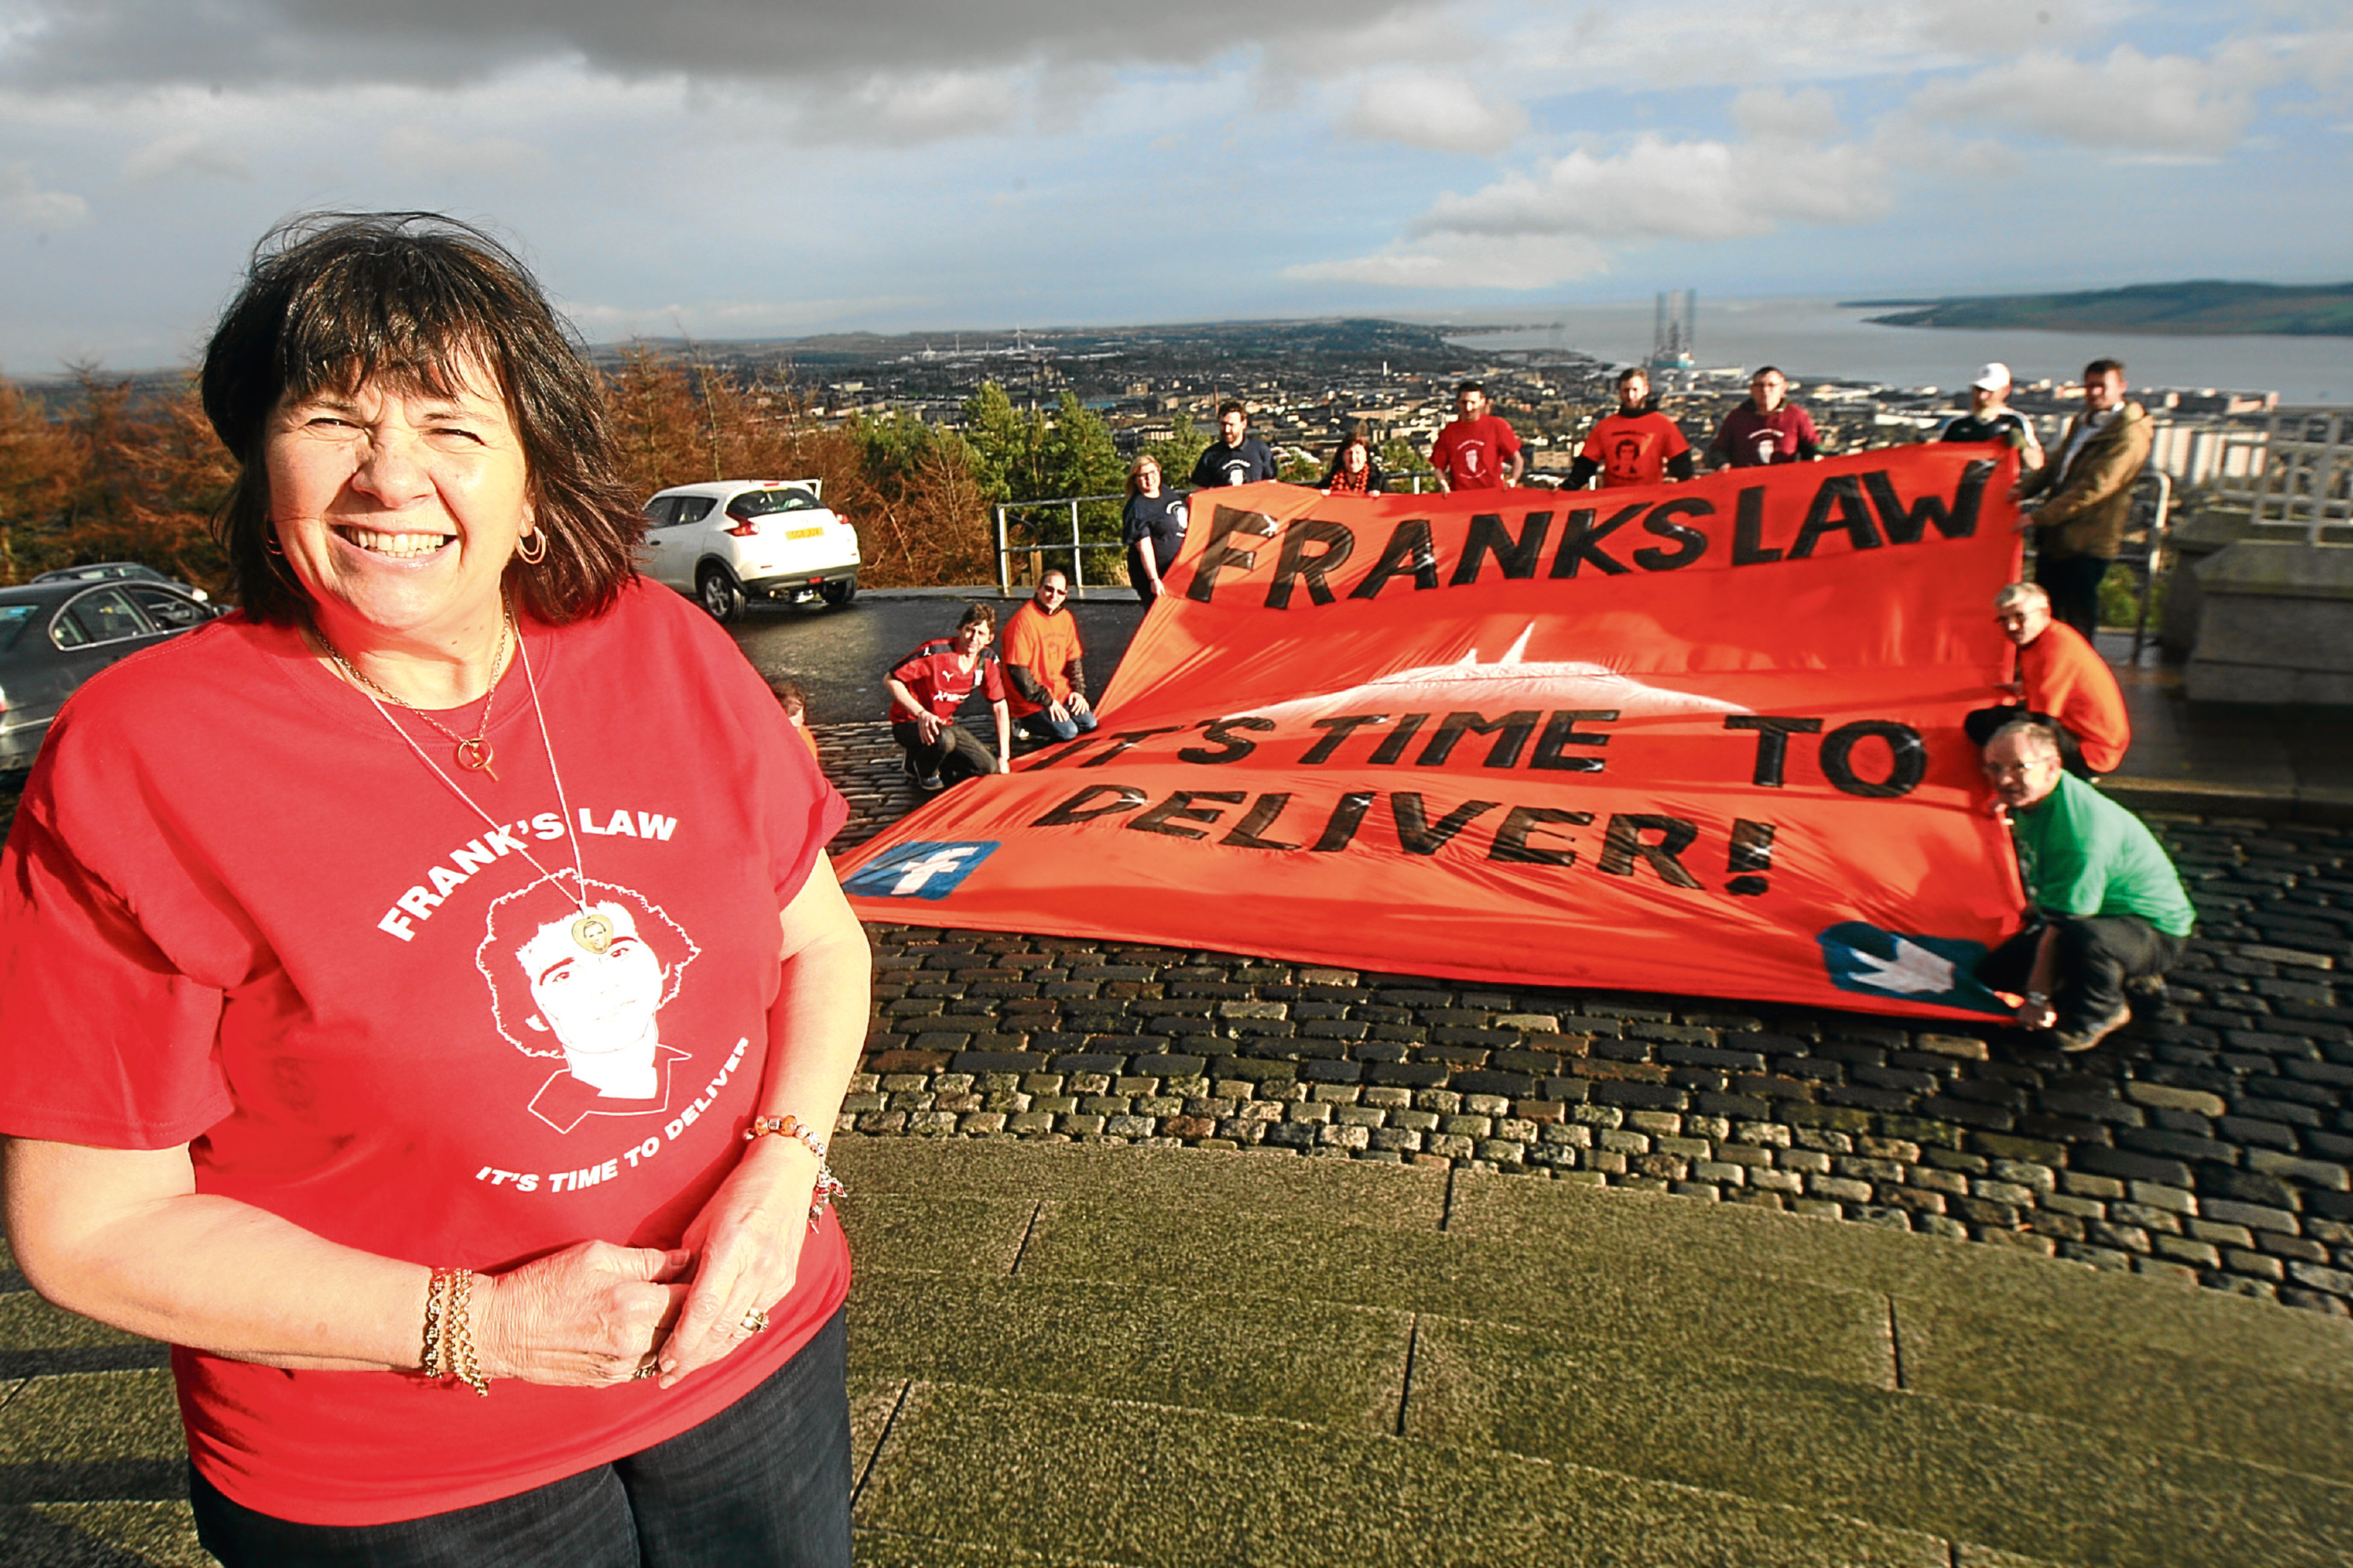 Frank's Army have supported Mrs Kopel since the campaign was launched.